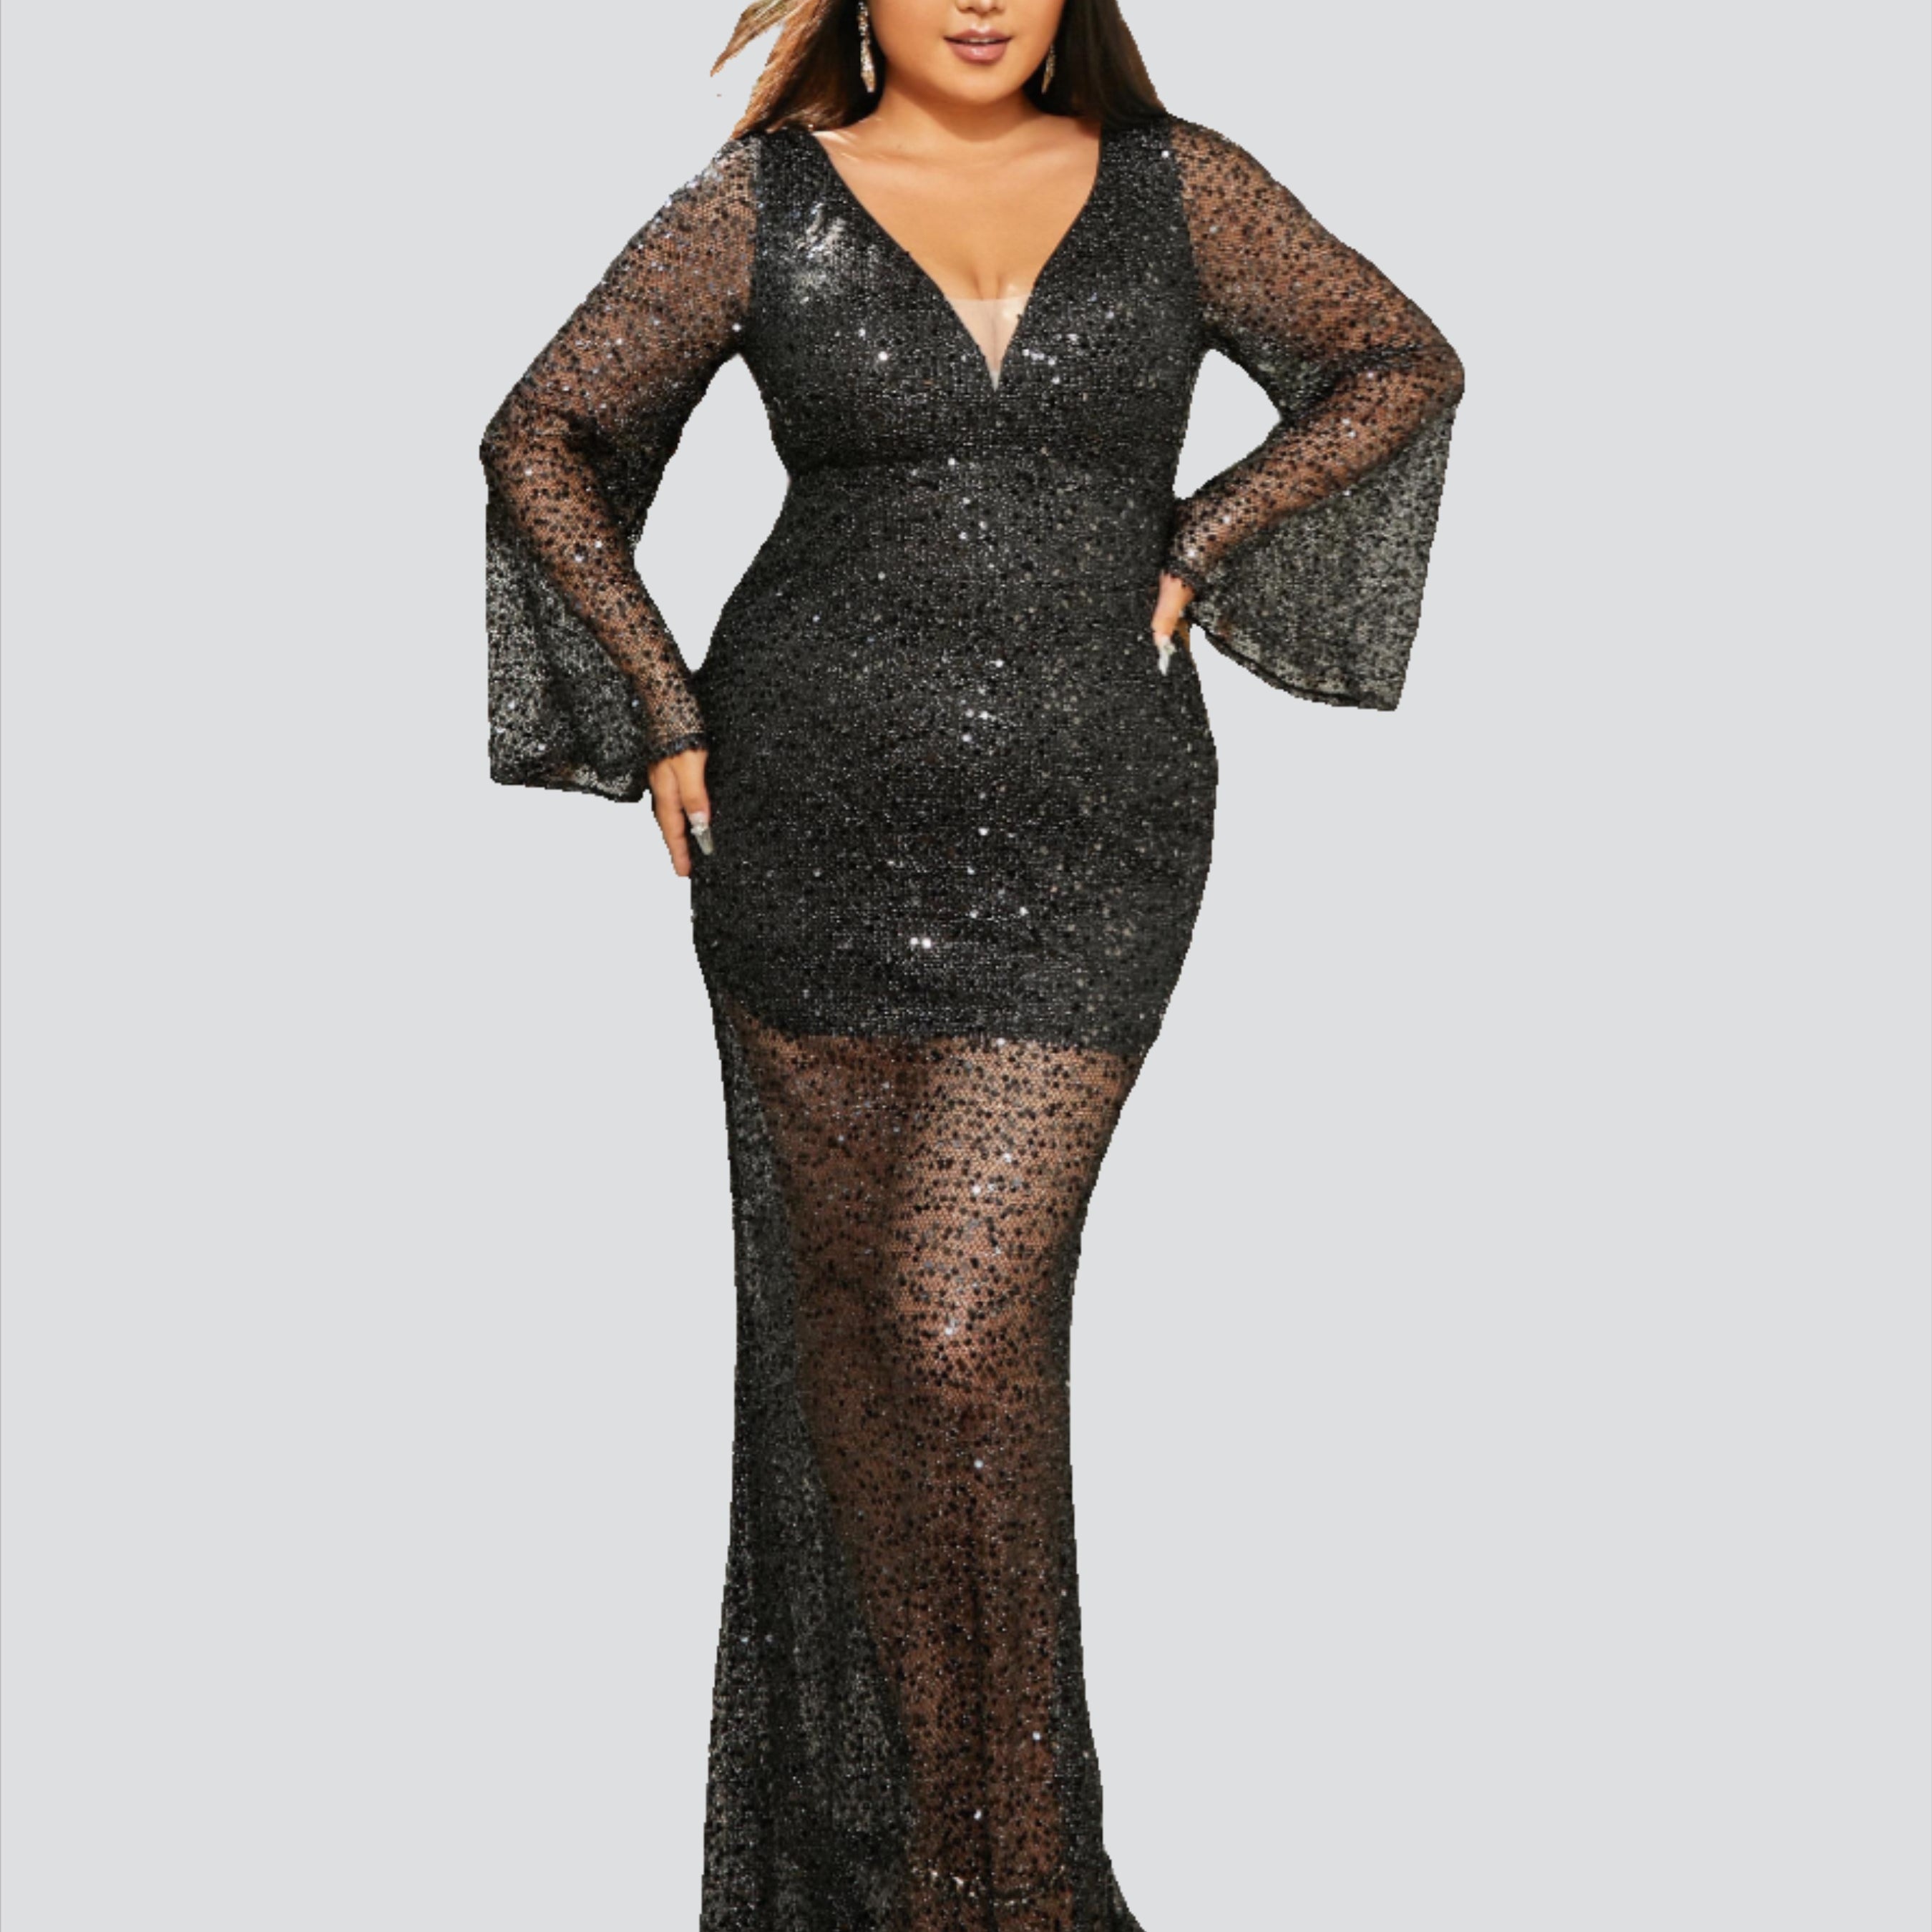 Plus Size Sexy Bell Sleeve Black Sequin Prom Dress